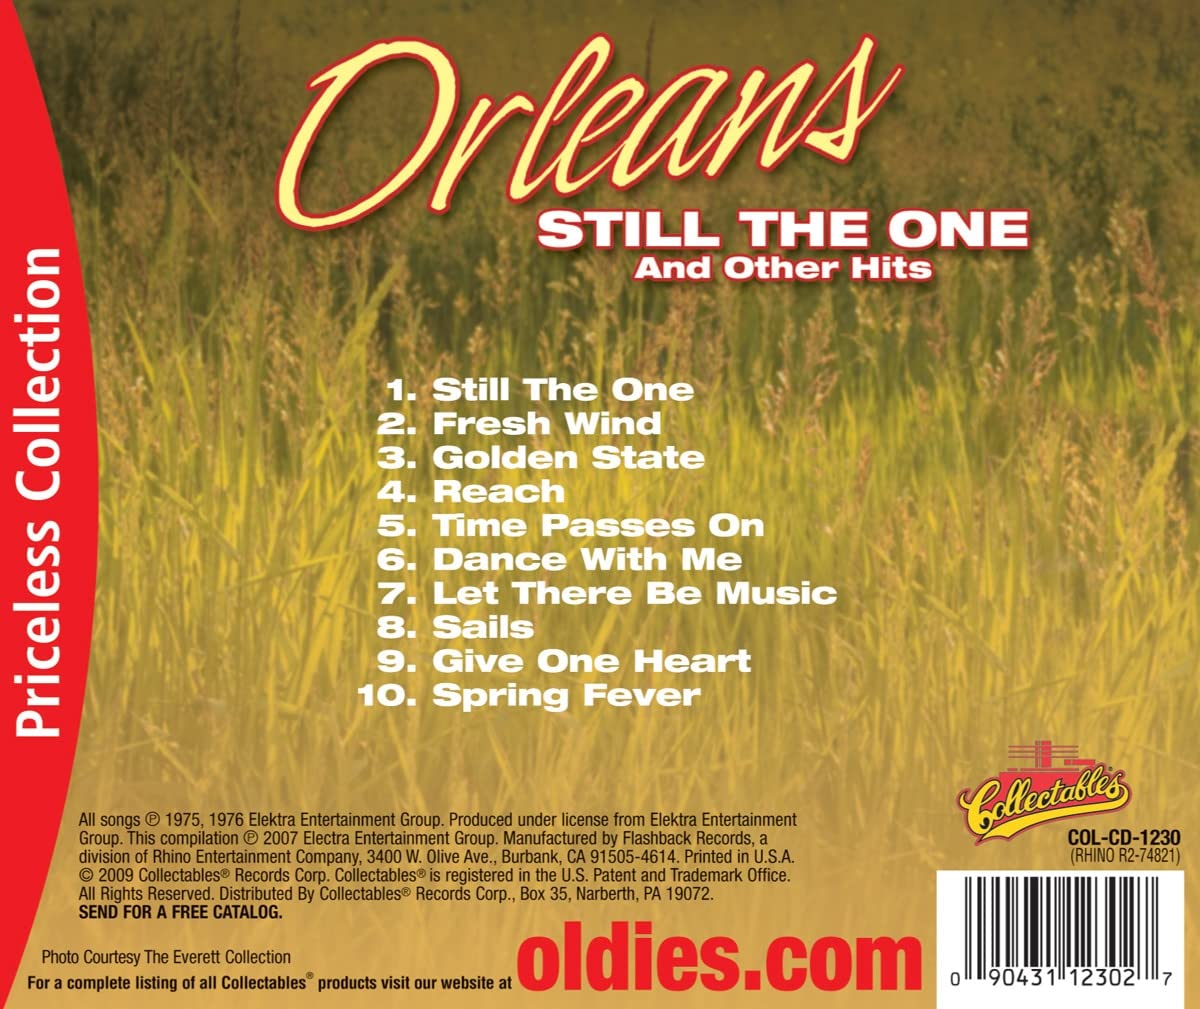 Orleans-Still the One & Other Hits CD